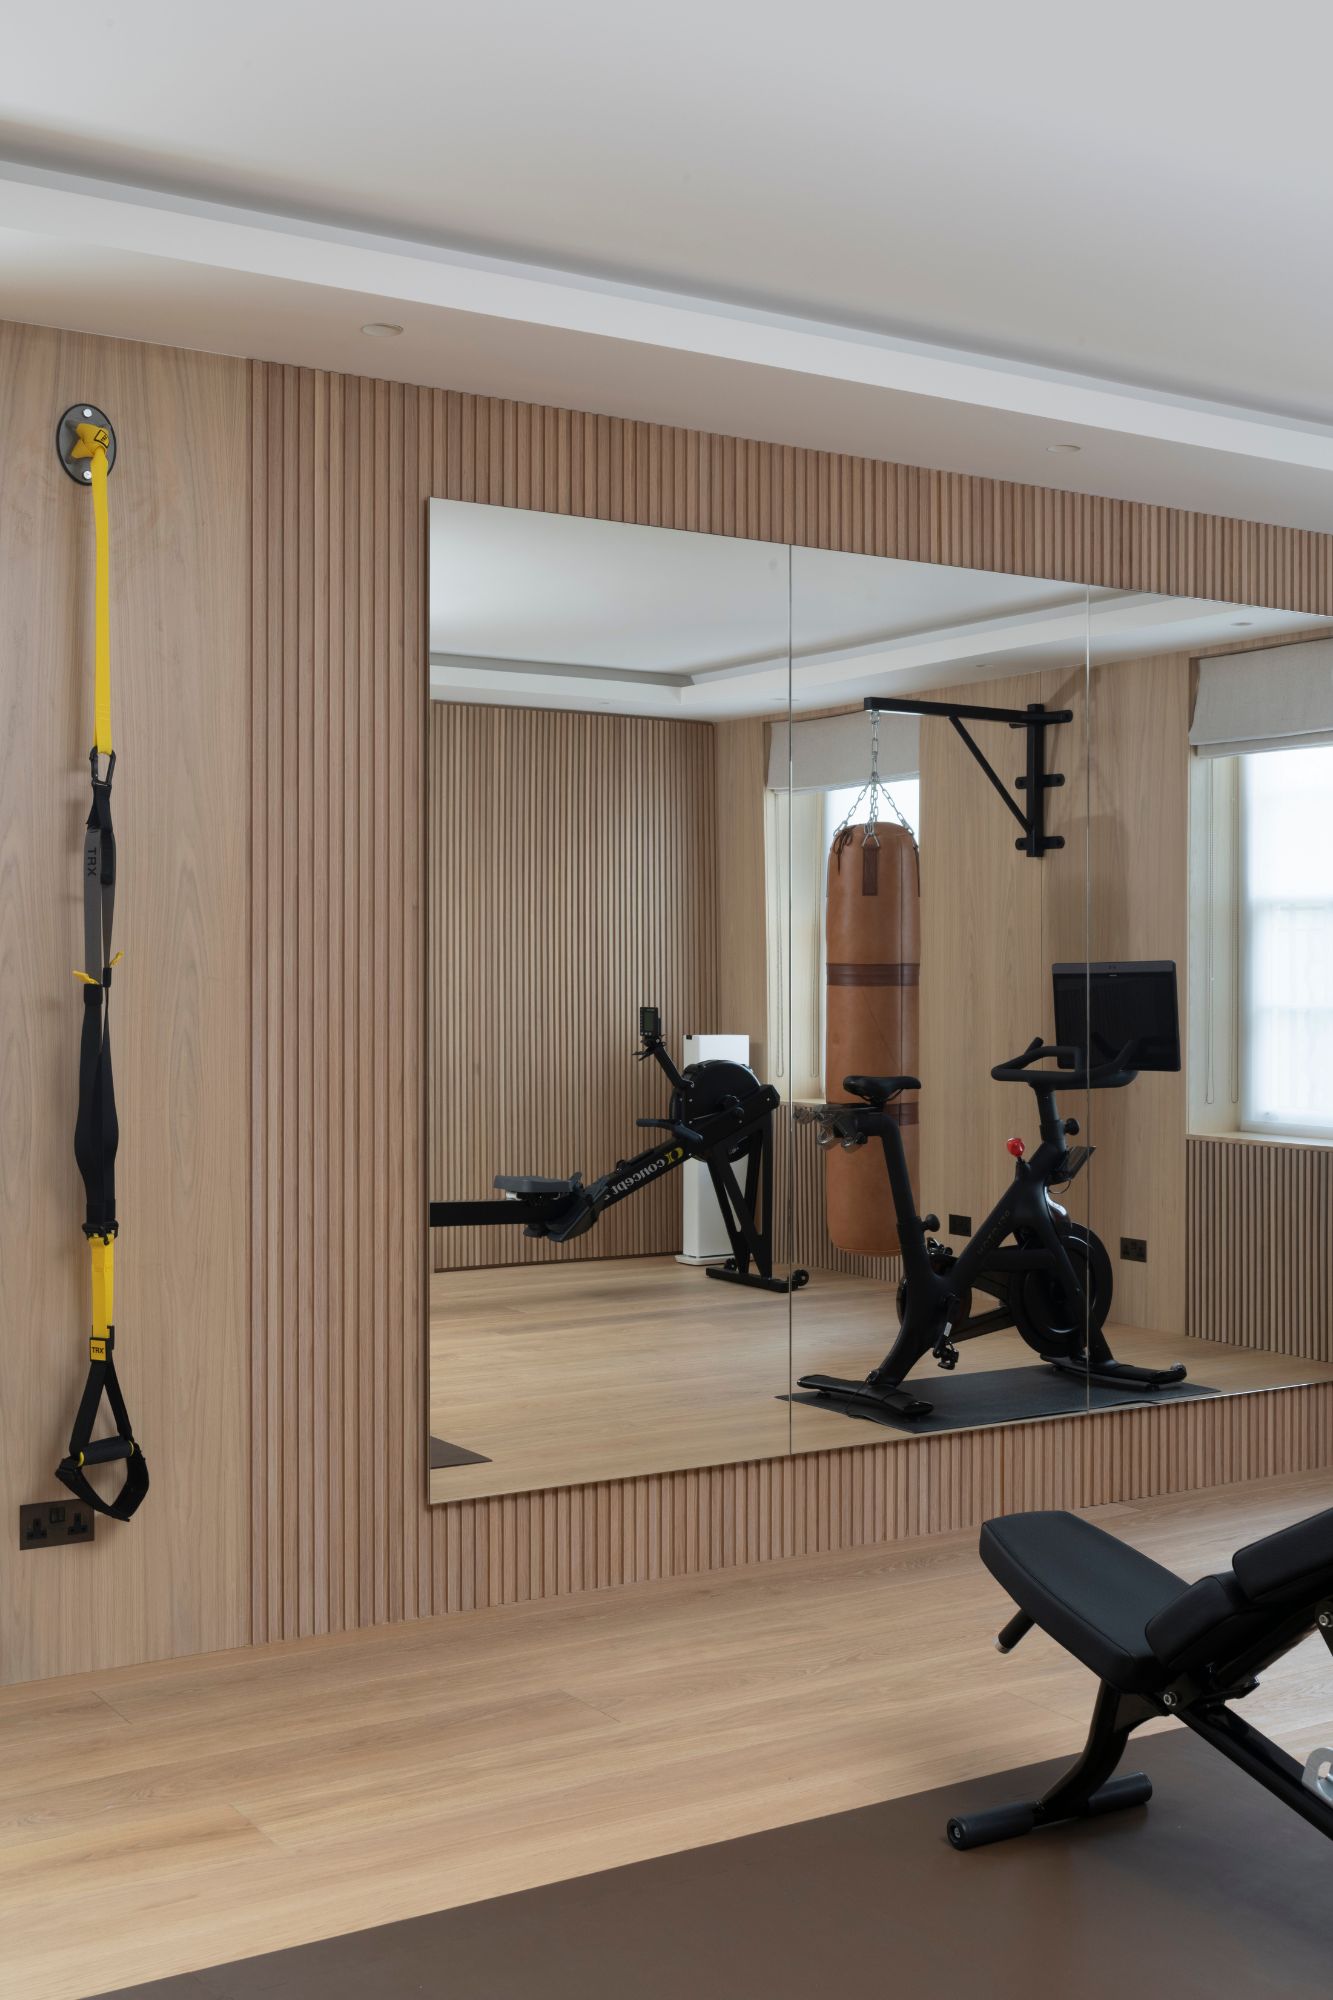 Paragon Studio, Paragon Studio Delivers Ambitious Design for Bespoke Home Gym in Knightsbridge Property